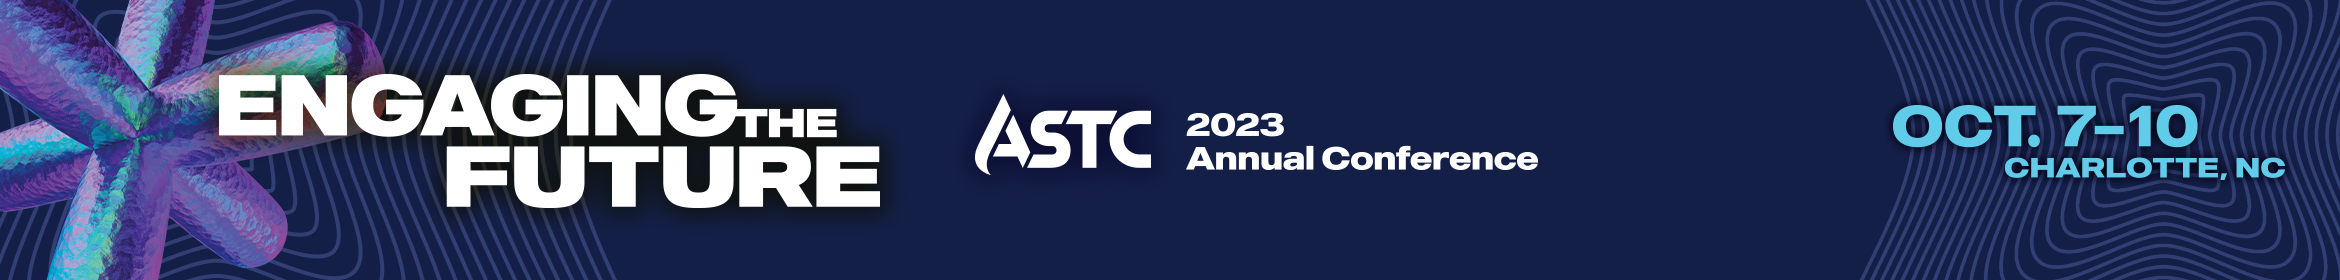 ASTC 2023 Annual Conference Main banner